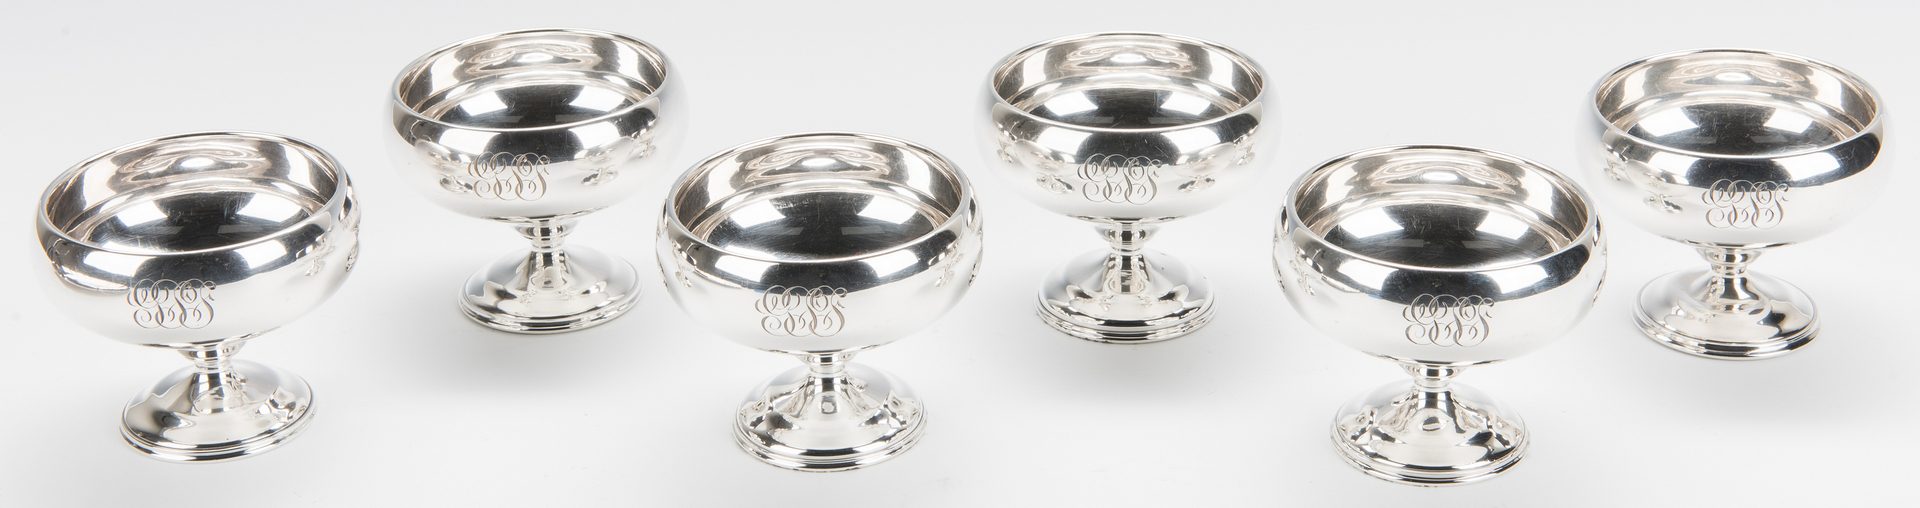 Lot 783: Oval Sterling Tray, Bowl and Sherbets, 8 pcs